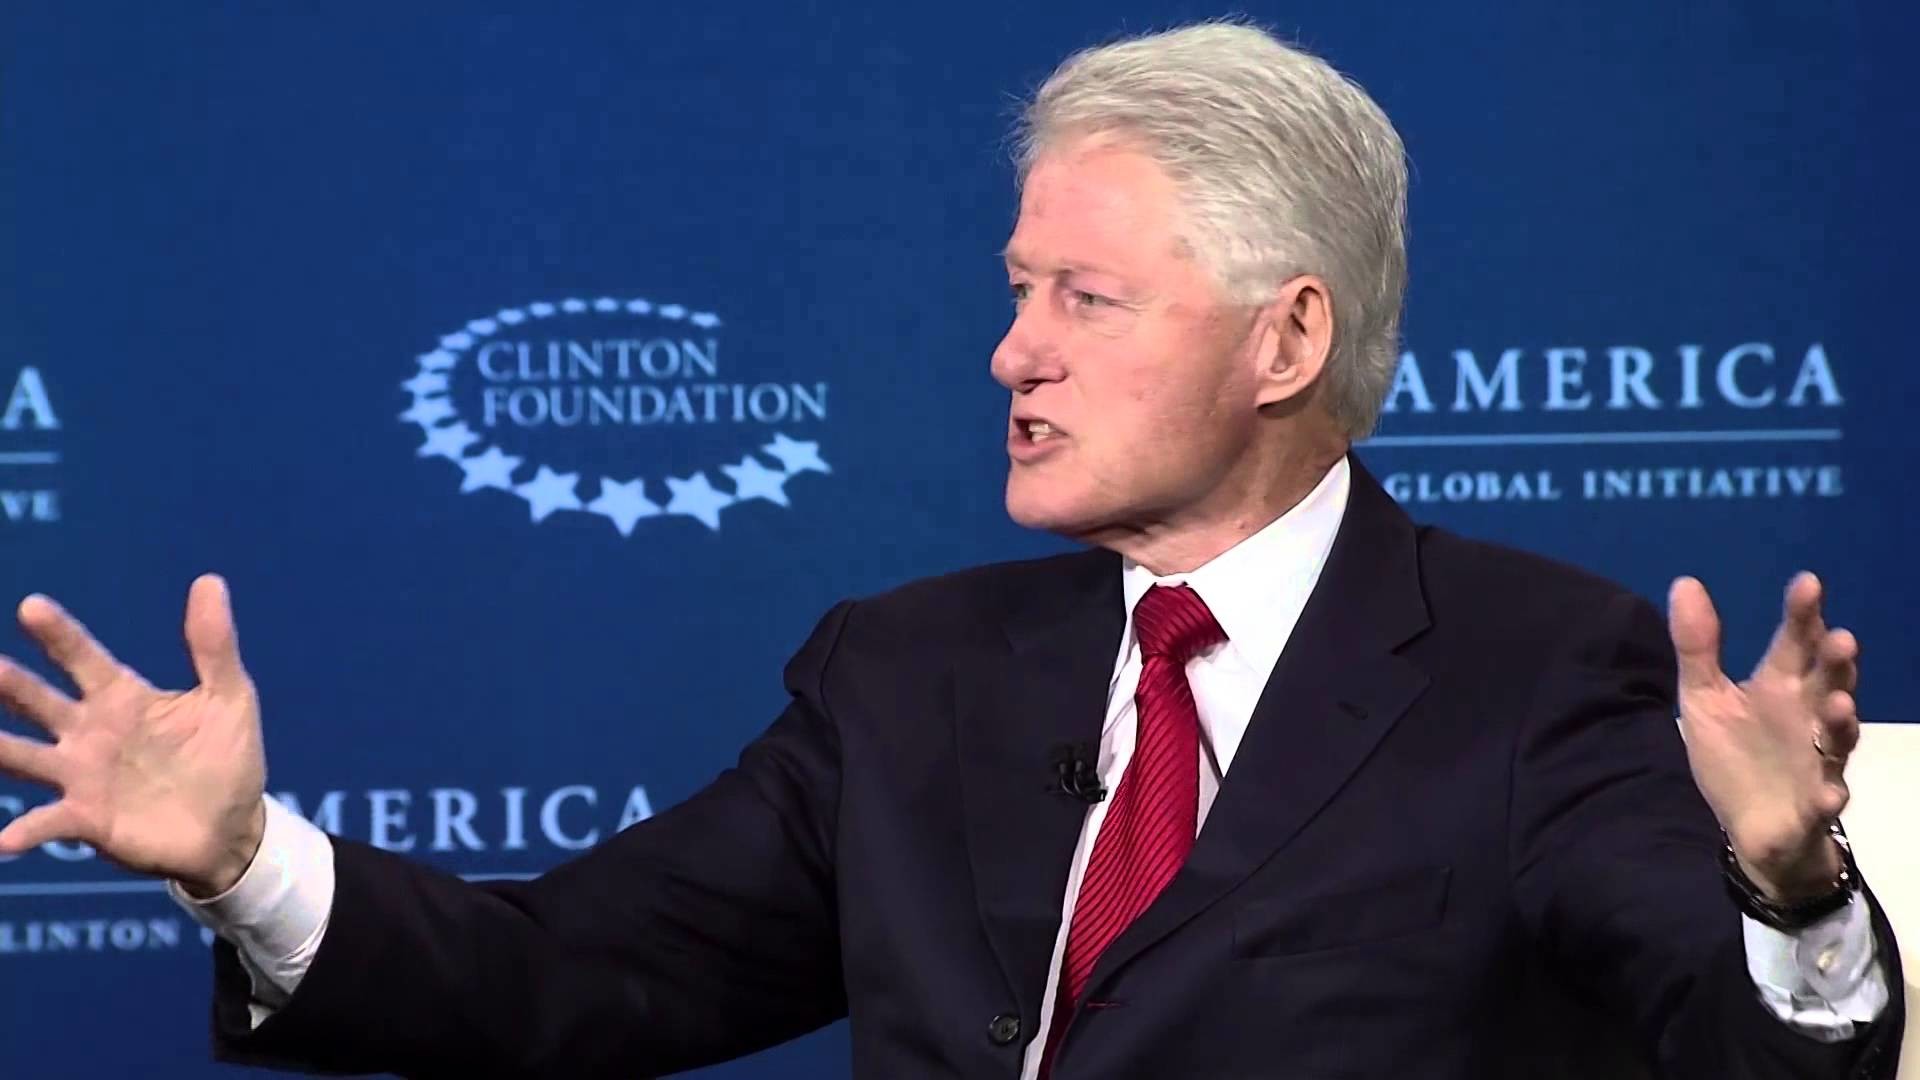 The Case for Economic Justice President Bill Clinton and David Gregory